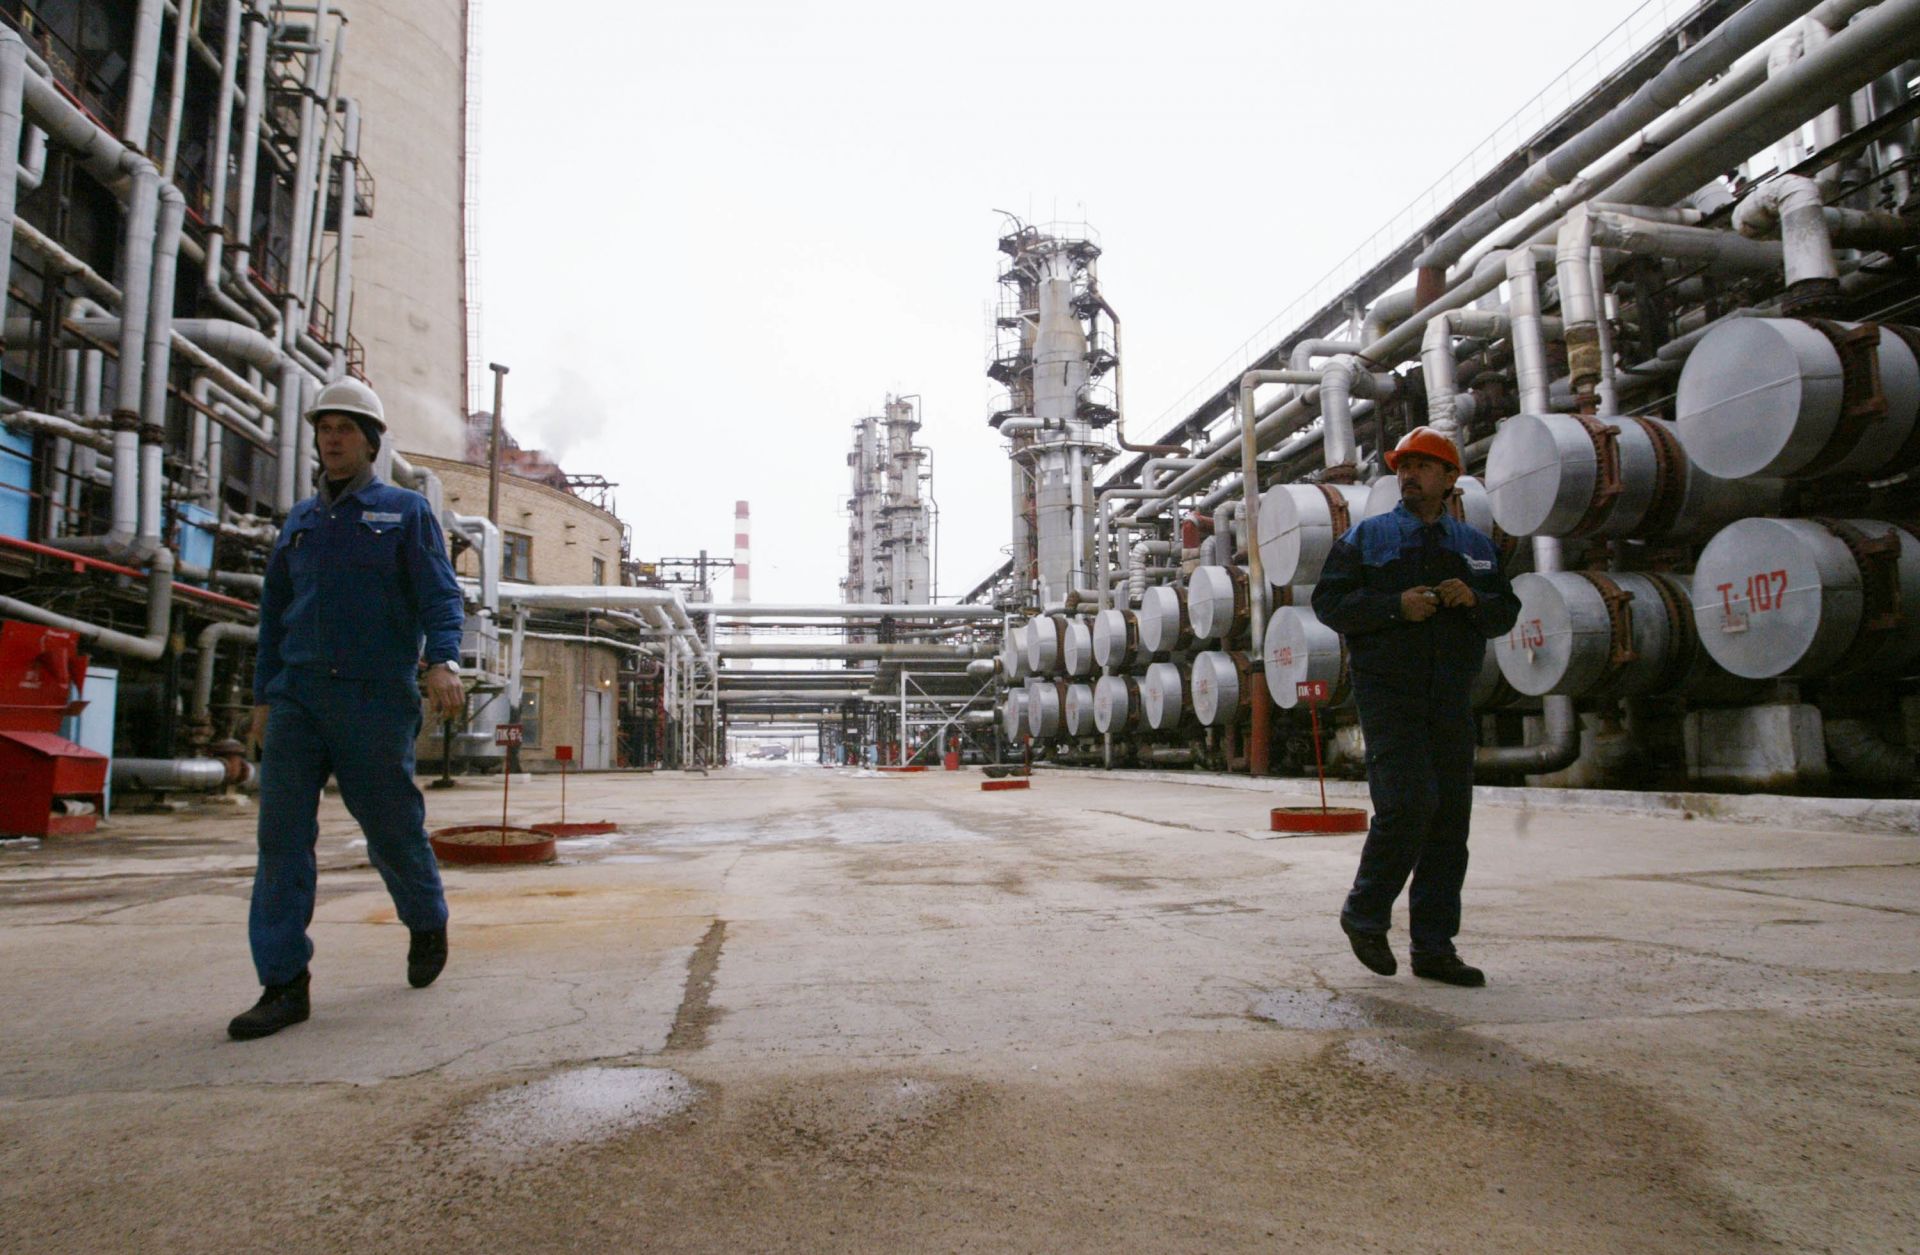 Workers walk through an oil refinery.